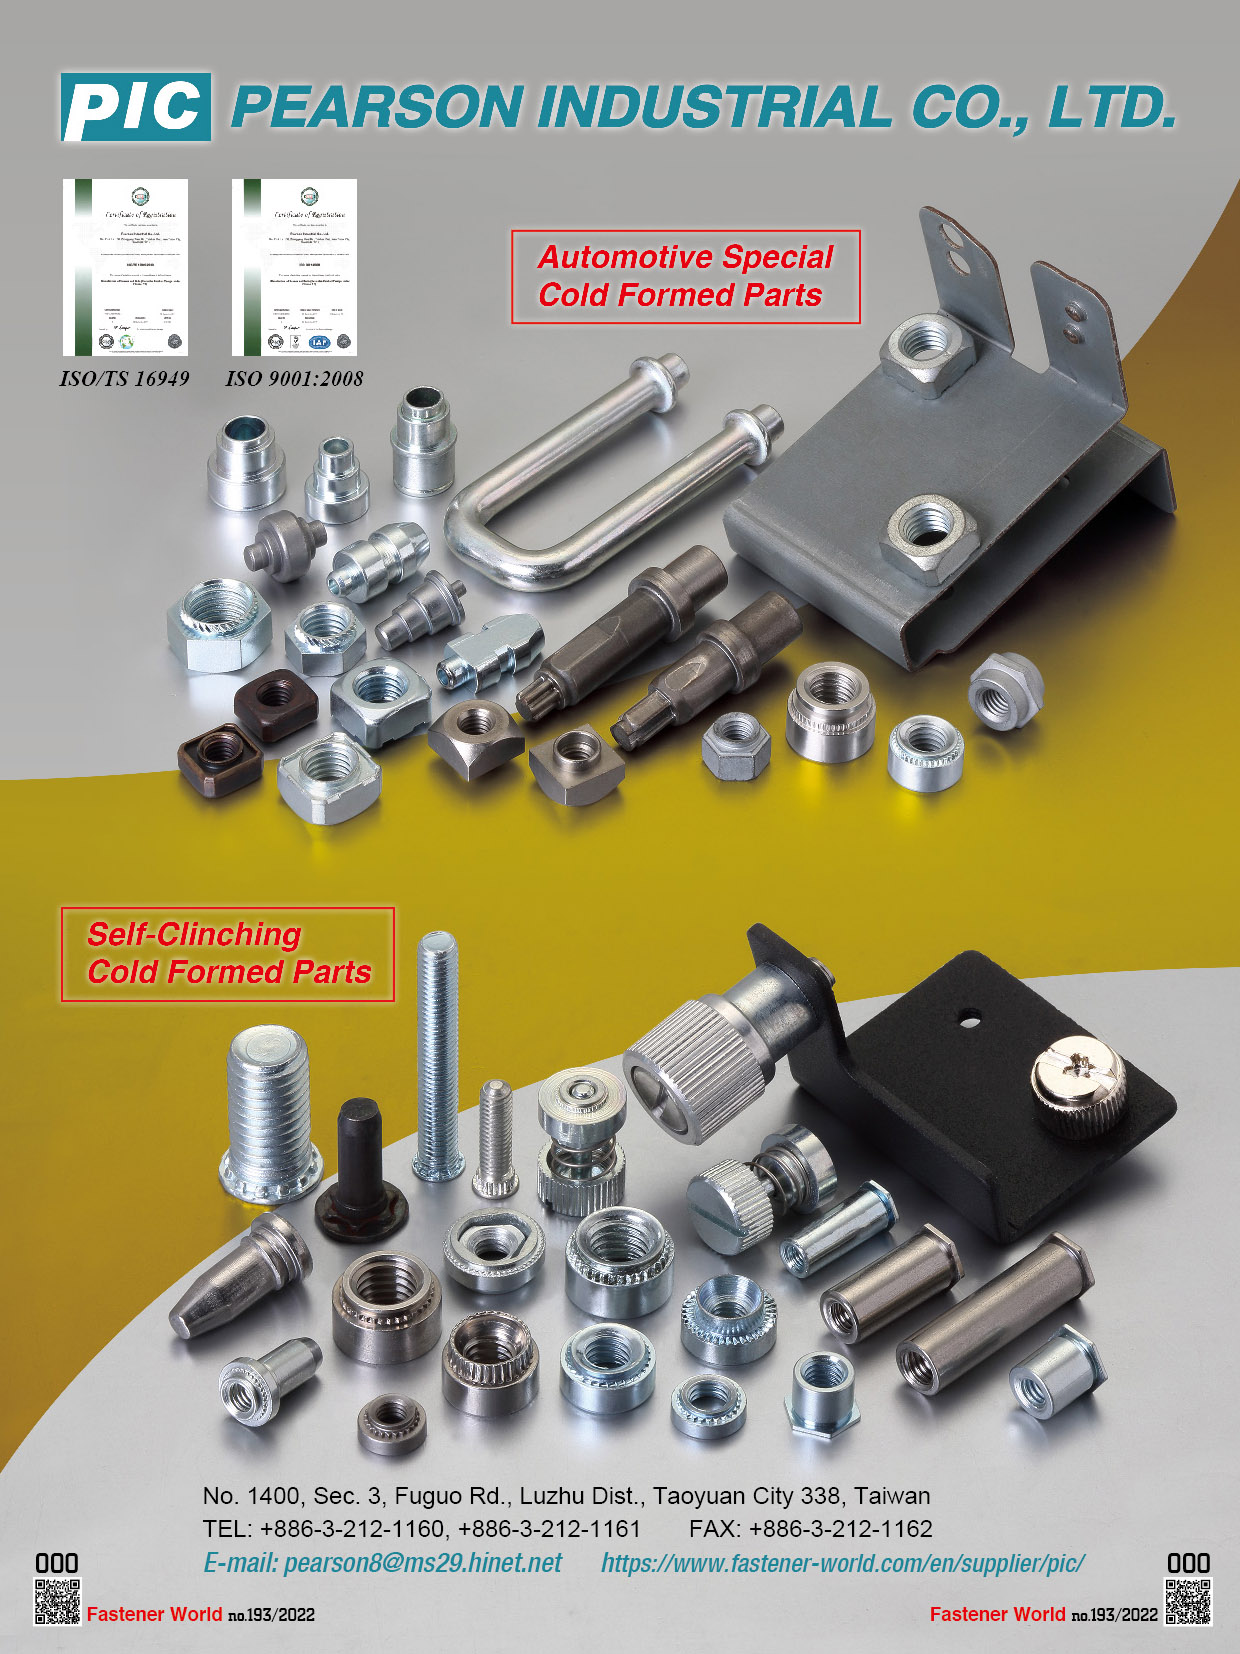 PEARSON INDUSTRIAL CO., LTD. , Automotive Special Cold Formed Parts, Self-Clinching Cold Formed Parts , Automotive Screws